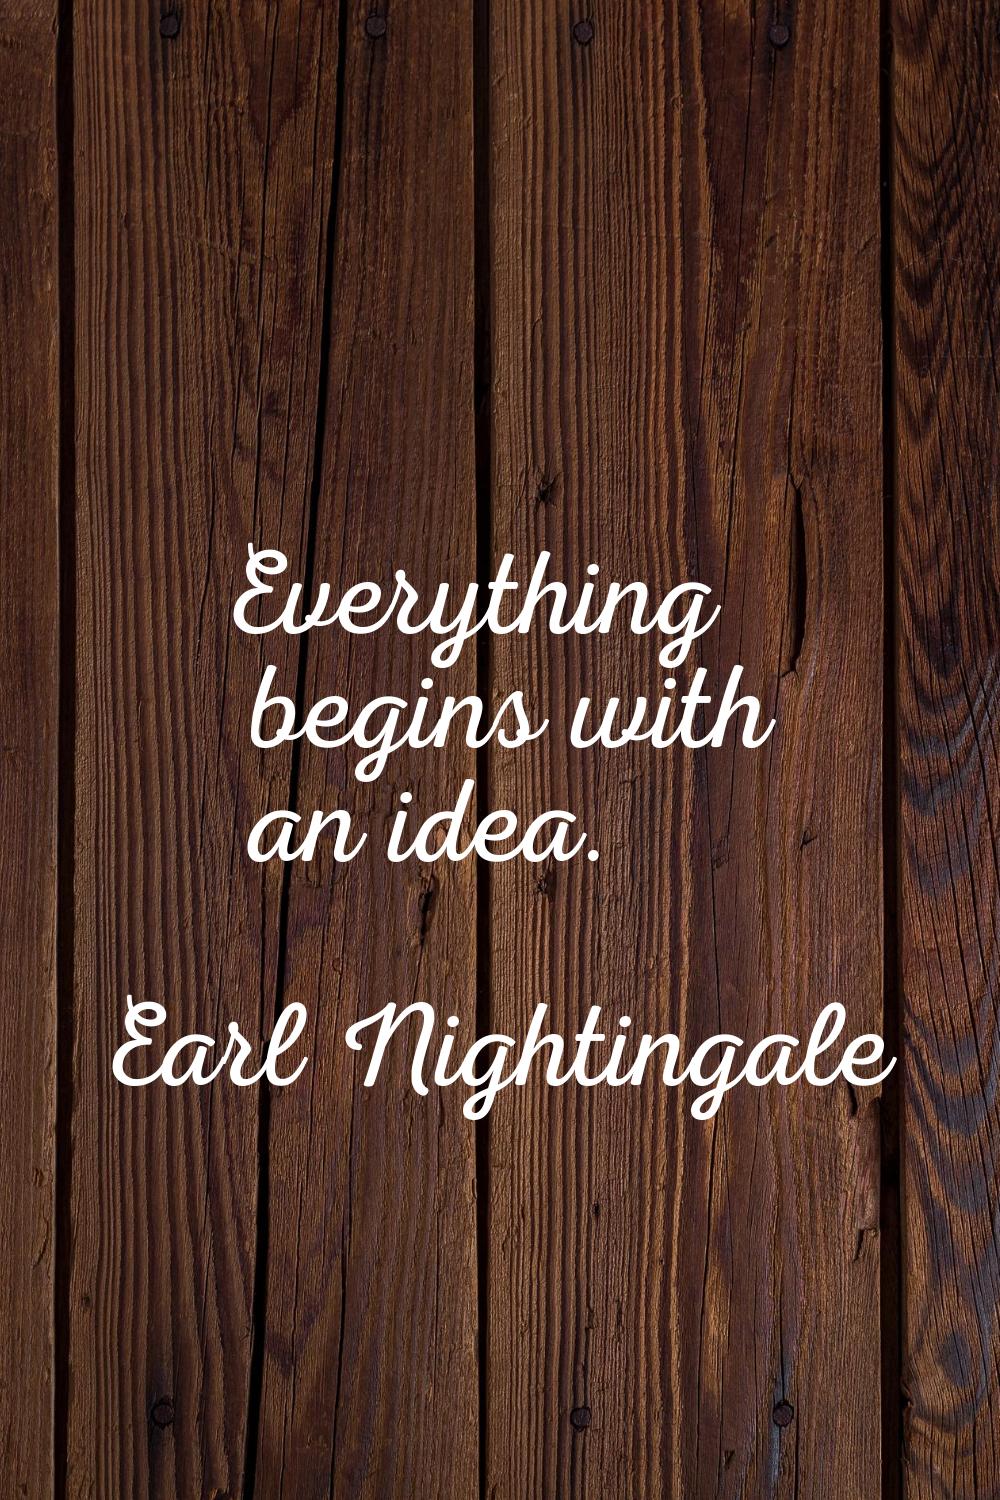 Everything begins with an idea.